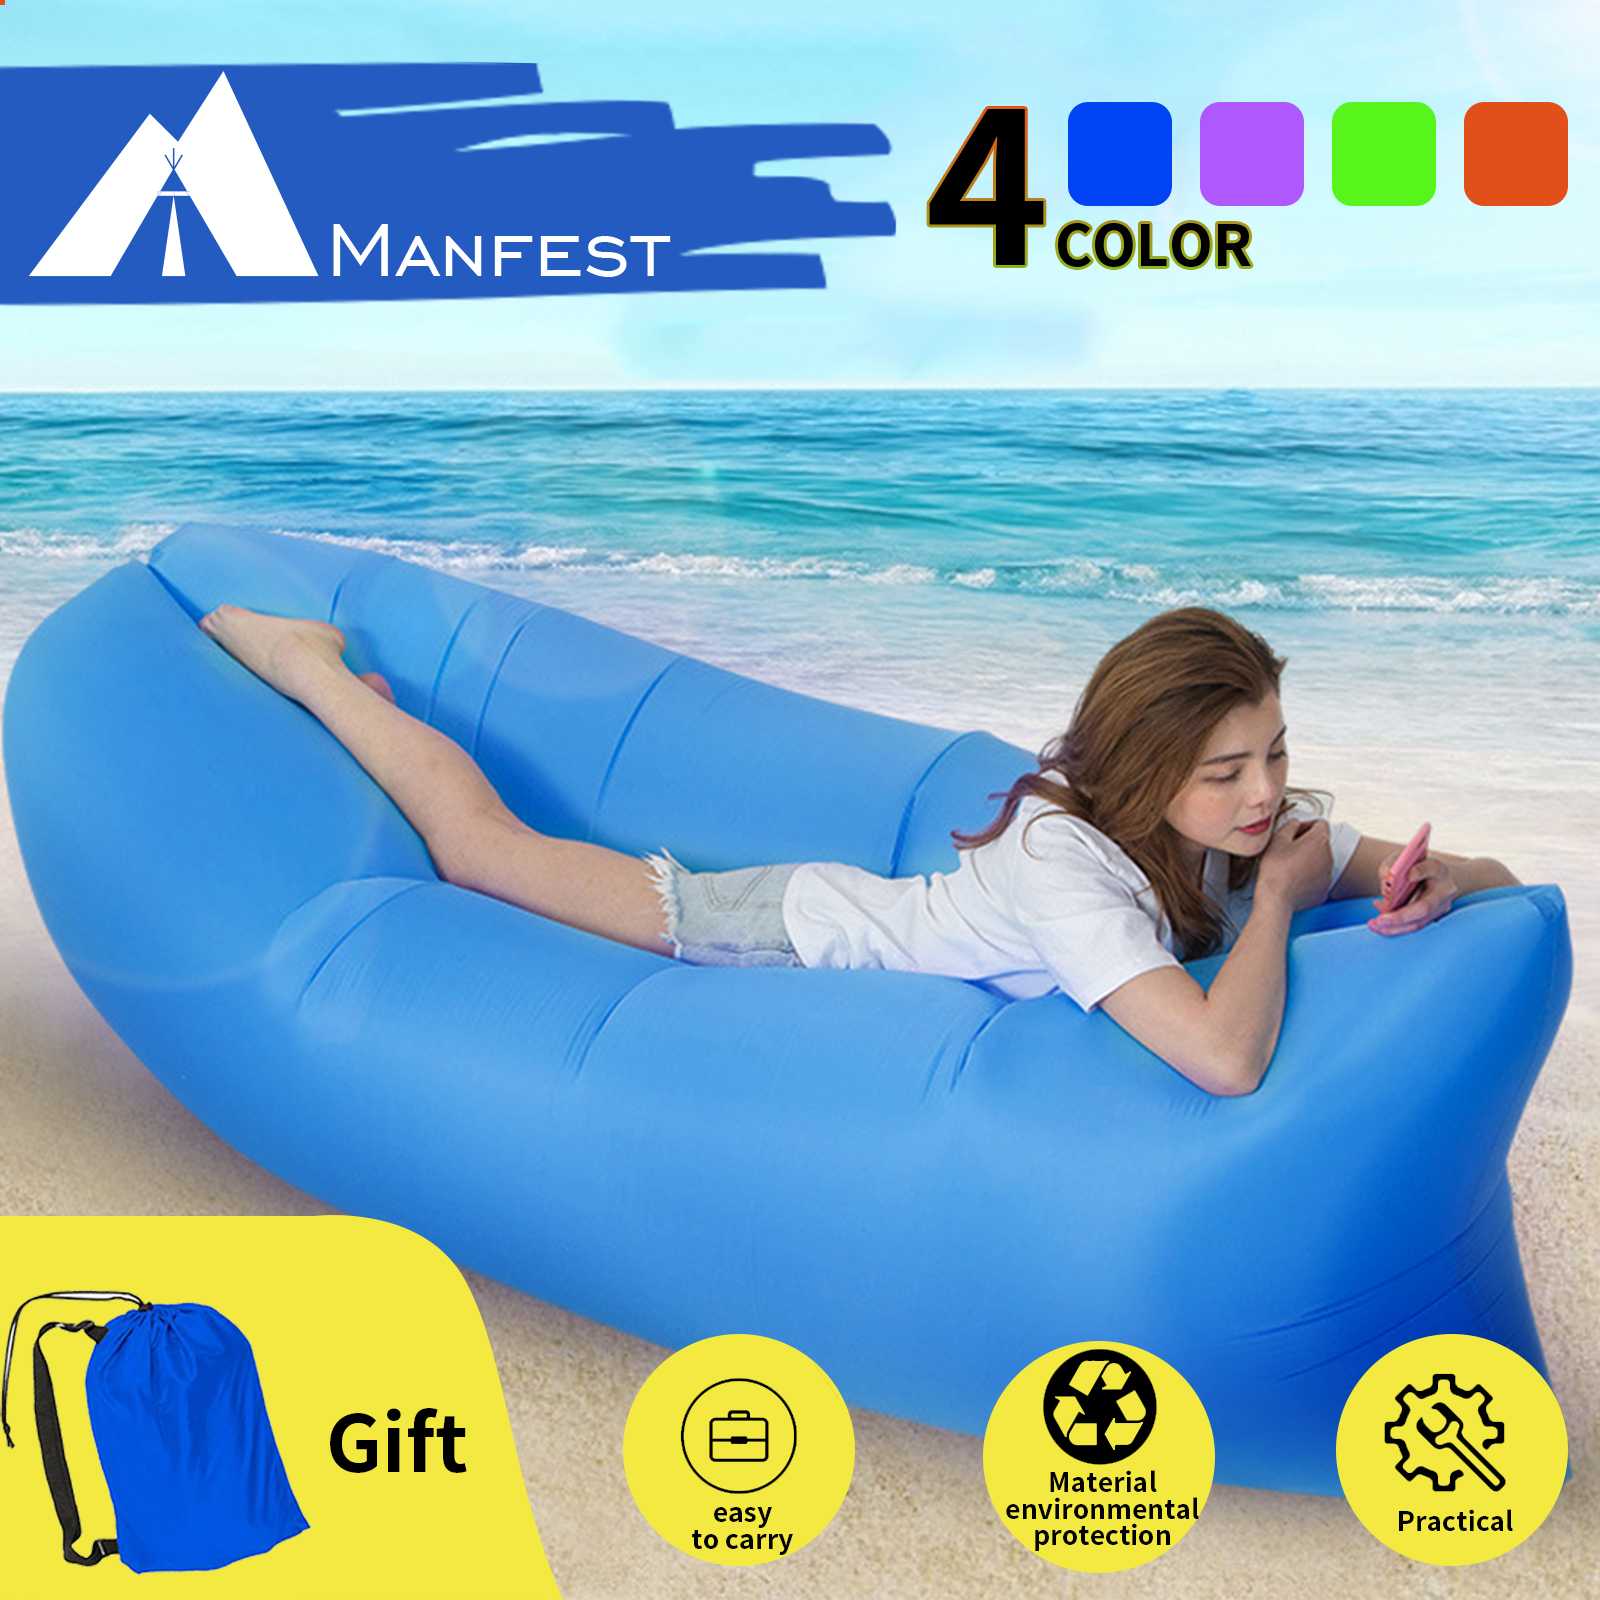 details about inflatable air bag sofa lounger sleeping bags camping bed  outdoor beach couch au